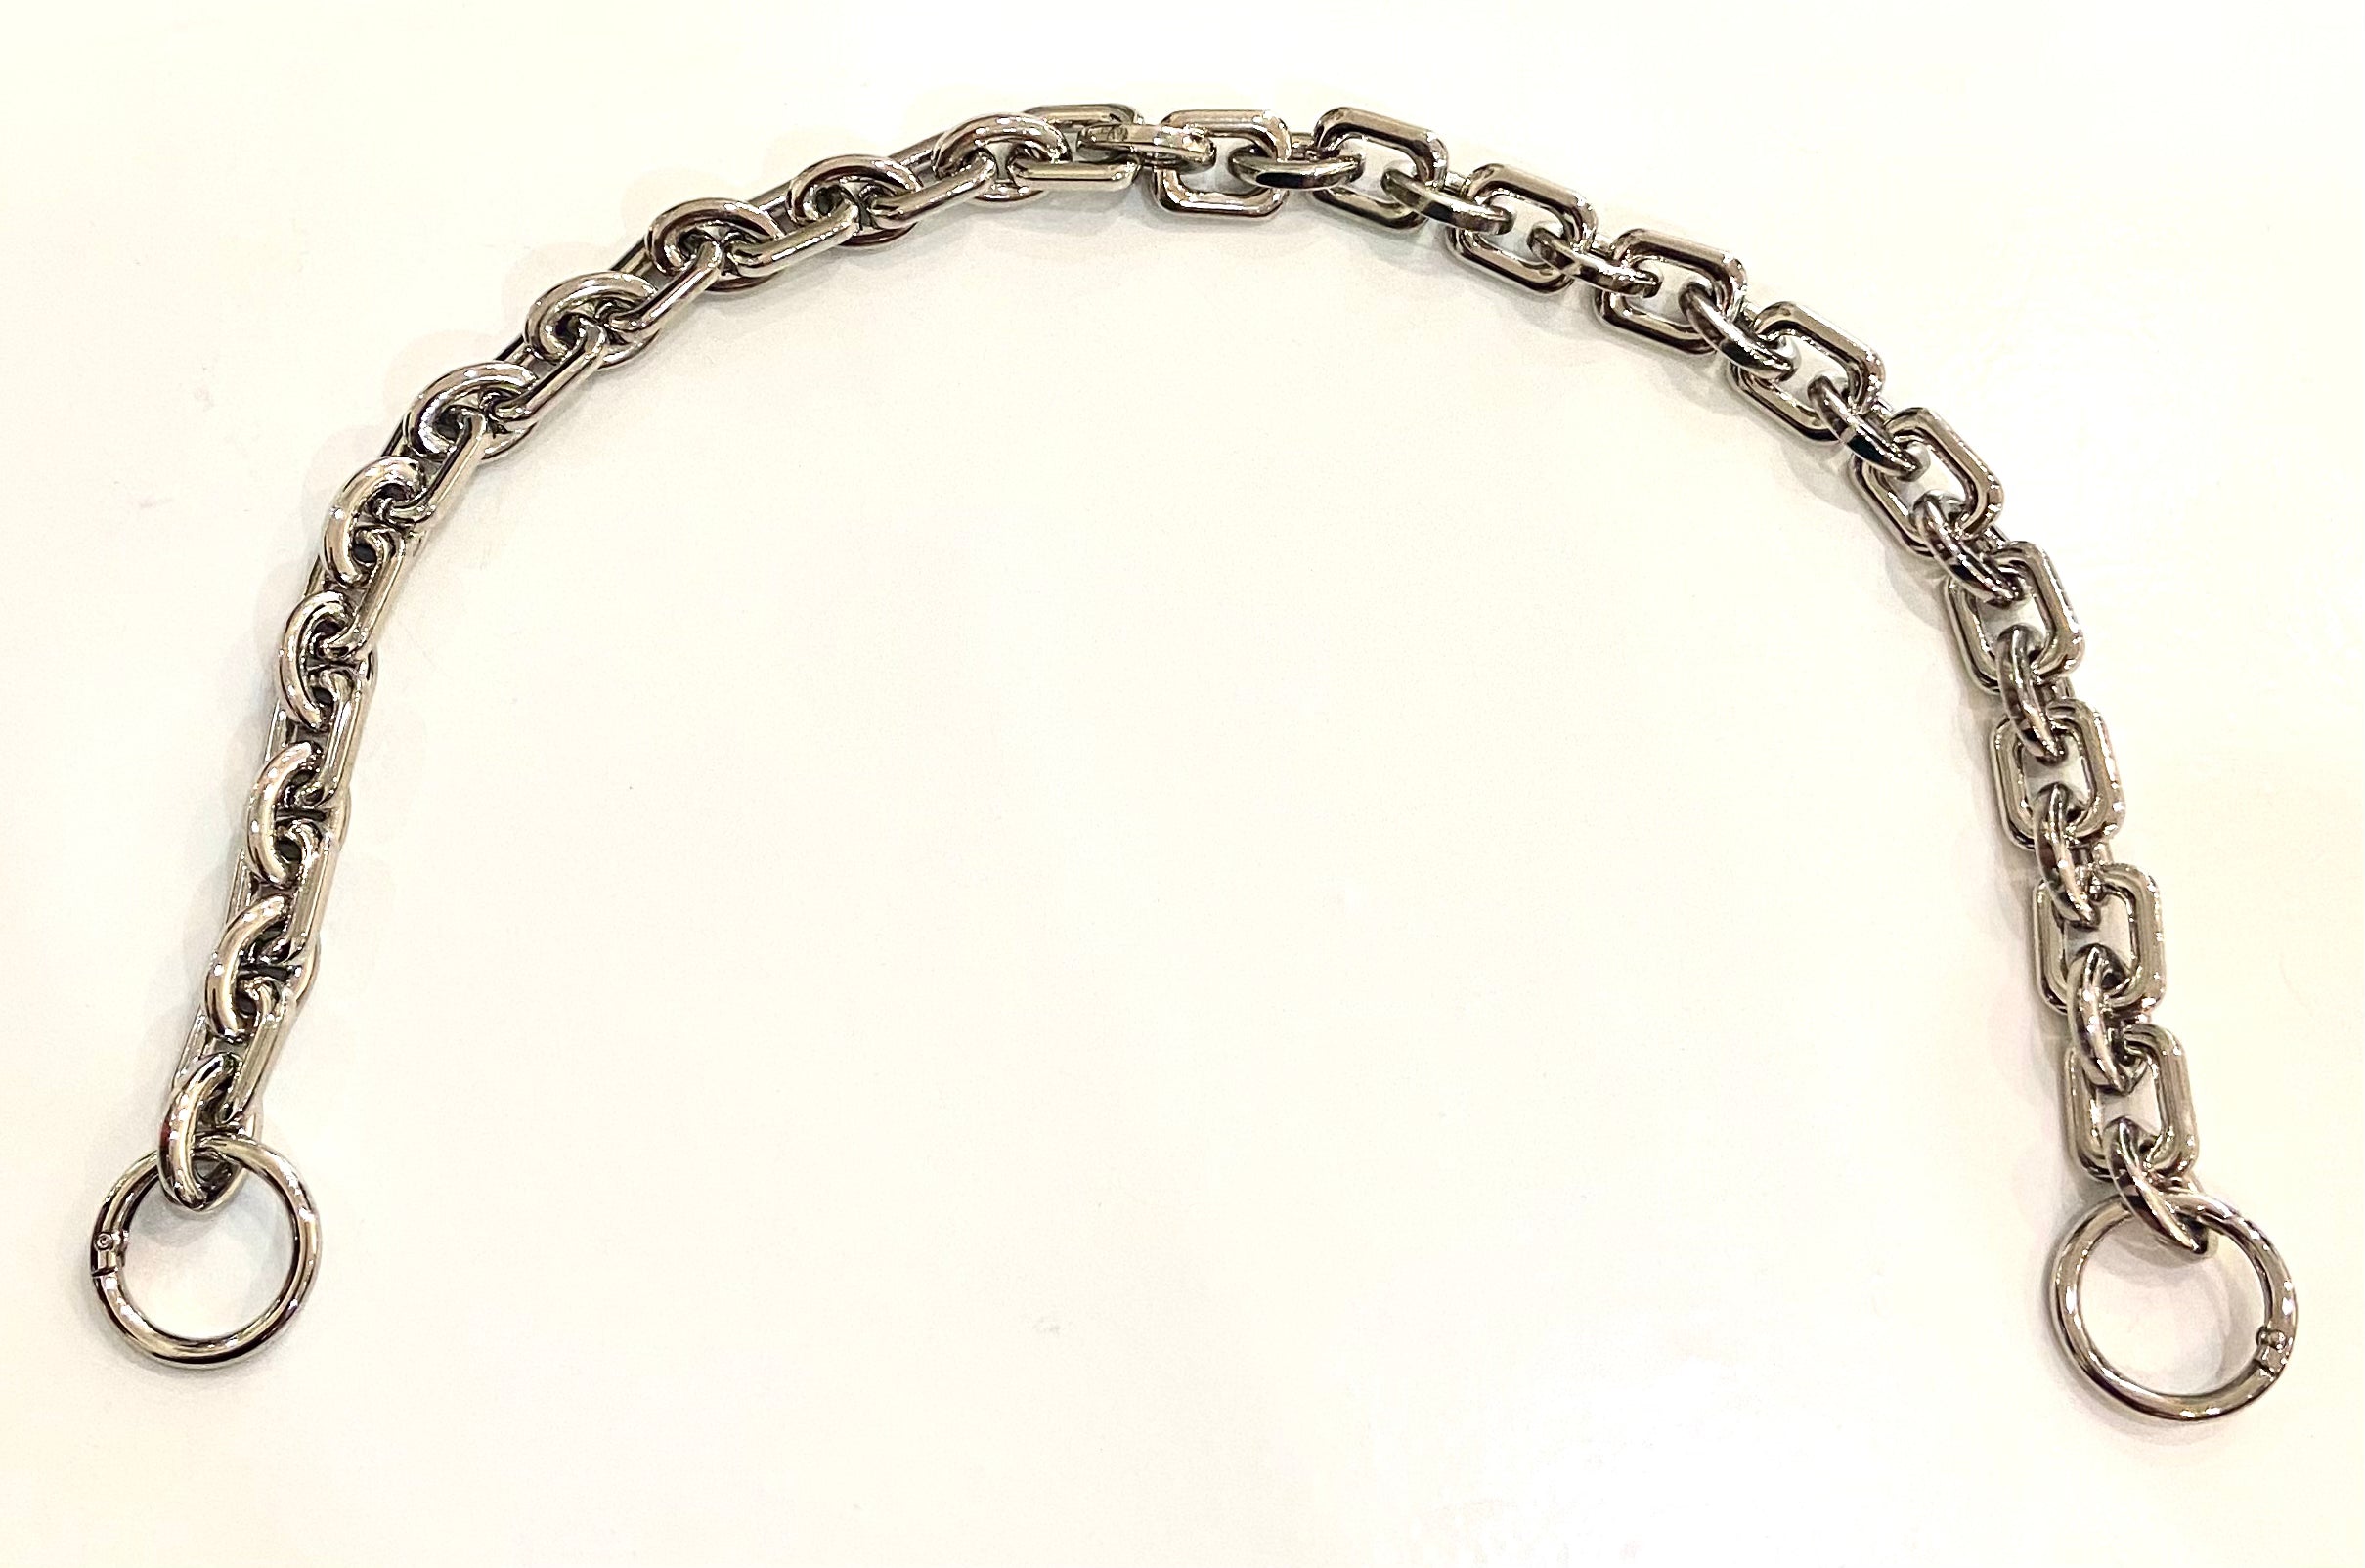 Long Silver Square/Round Link Bag Chain